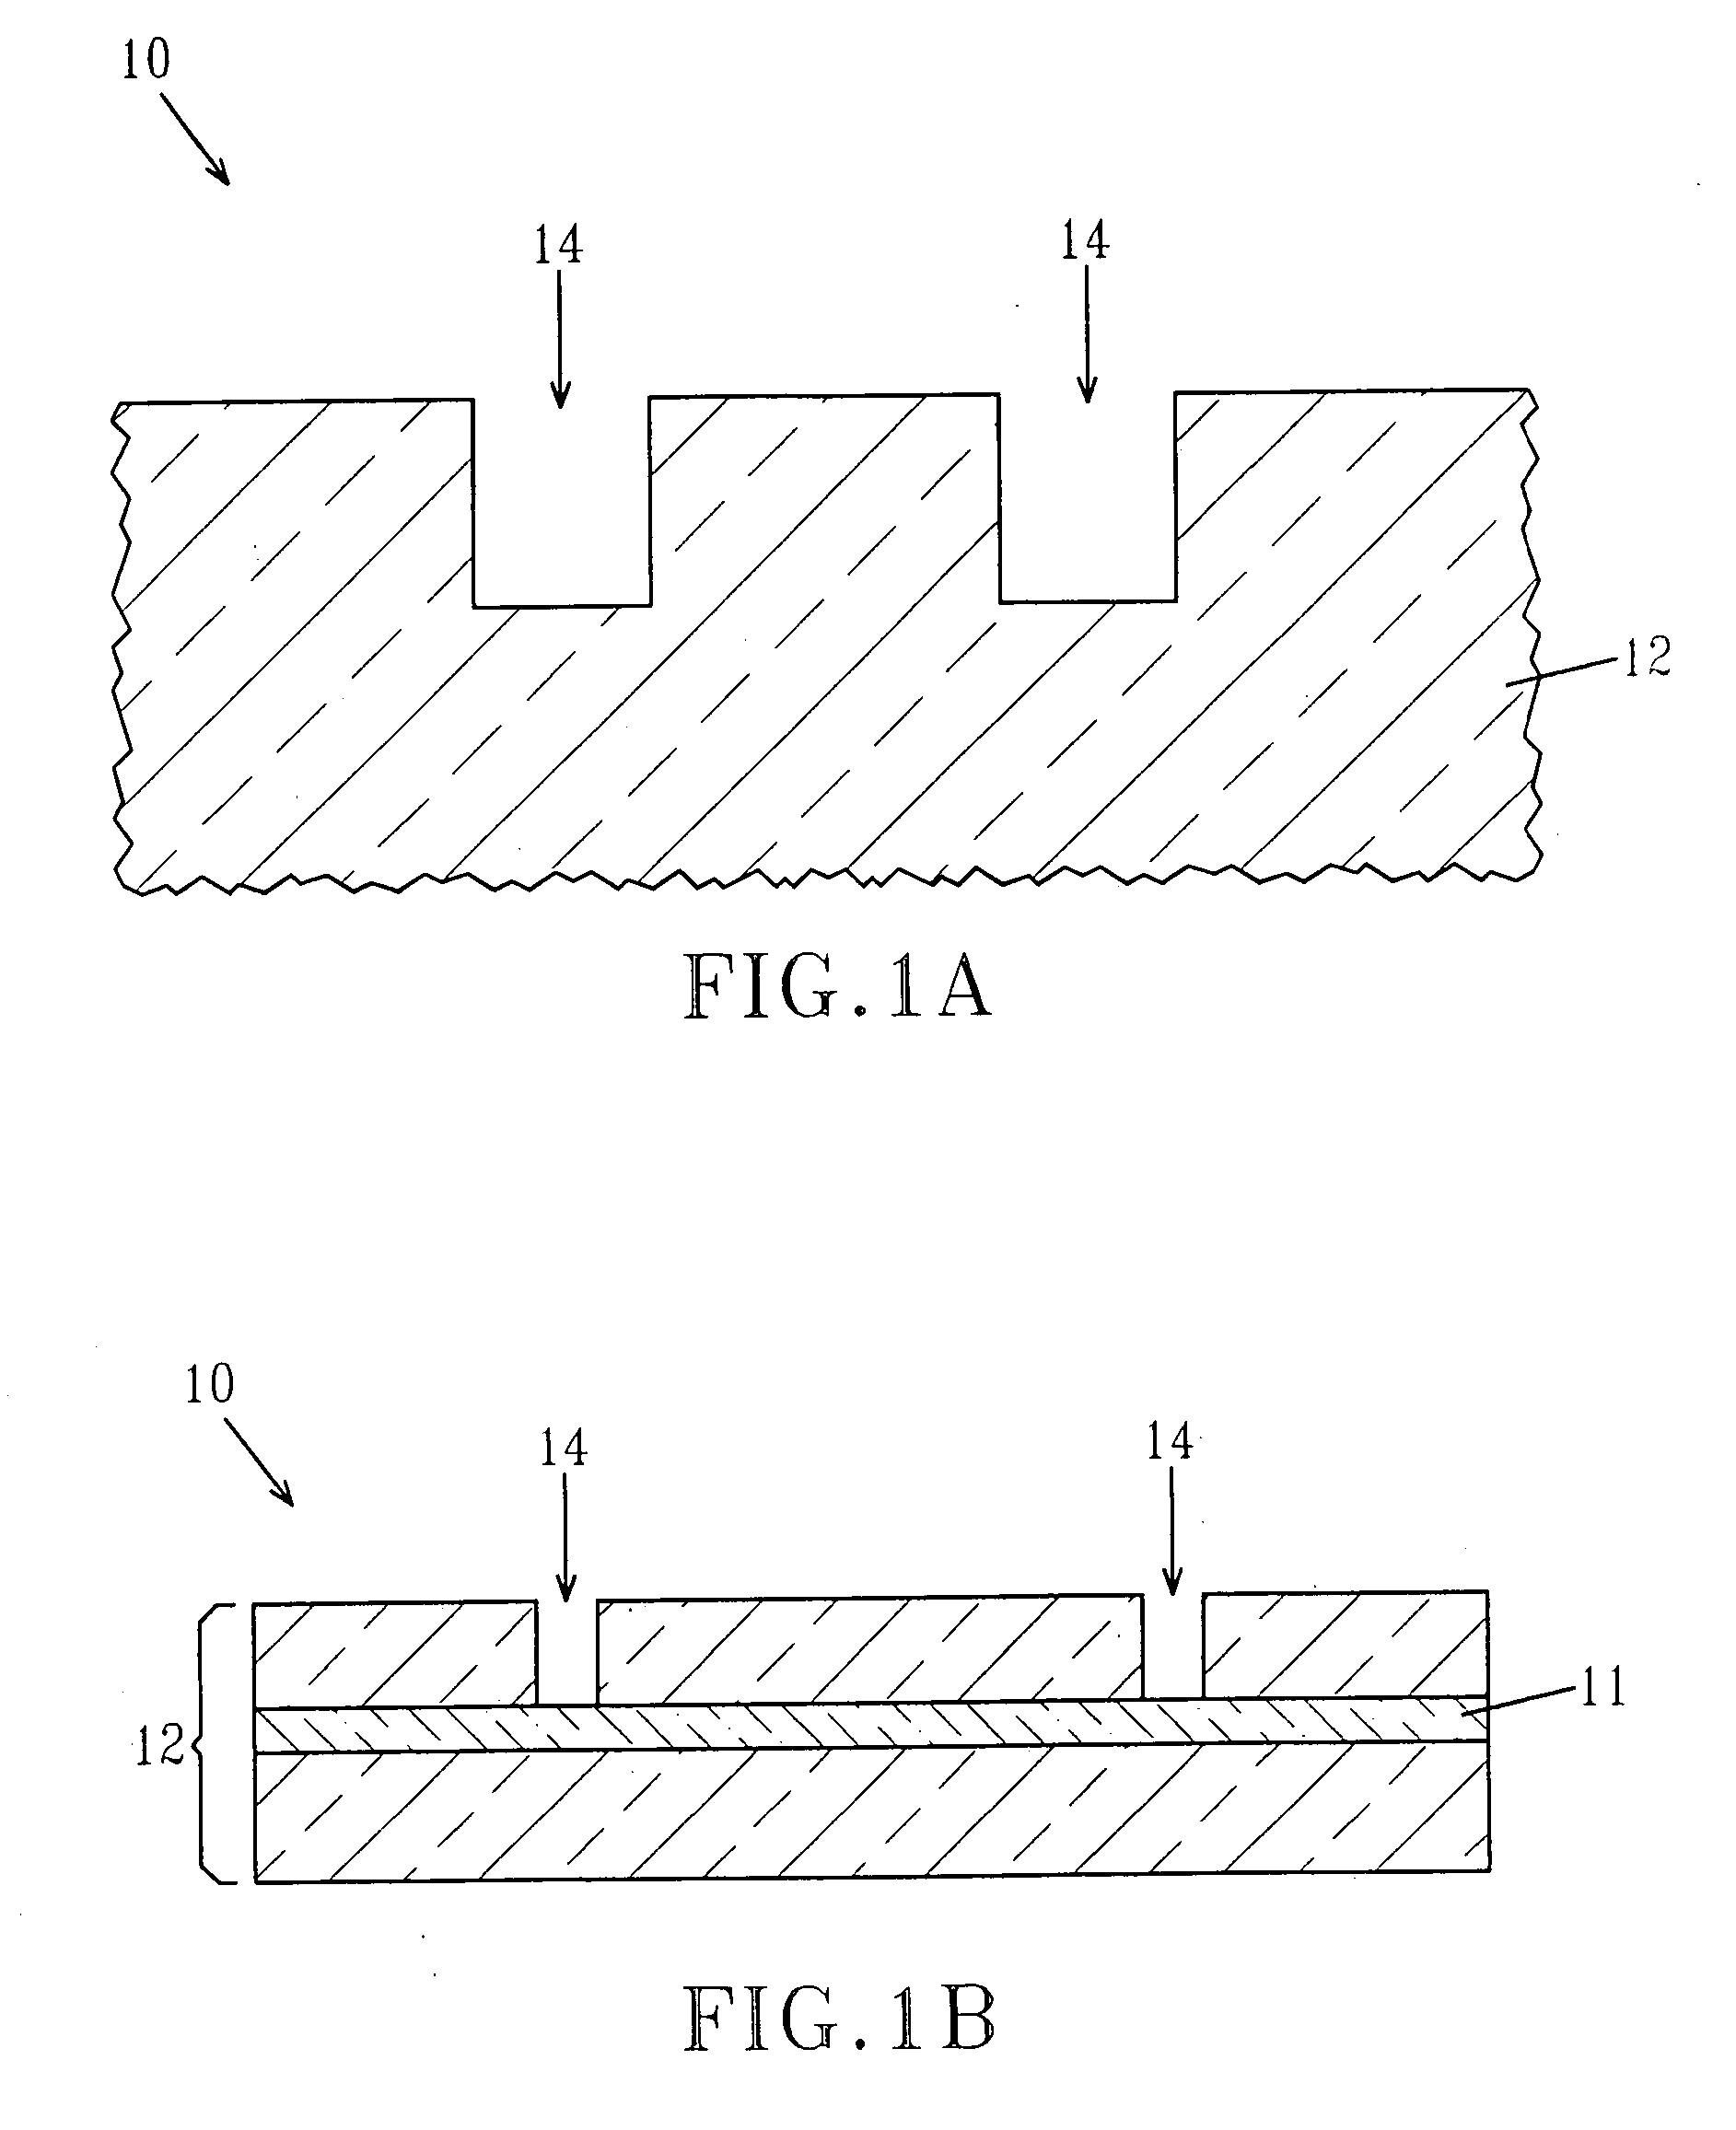 Method of obtaining release-standing micro structures and devices by selective etch removal of protective and sacrificial layer using the same